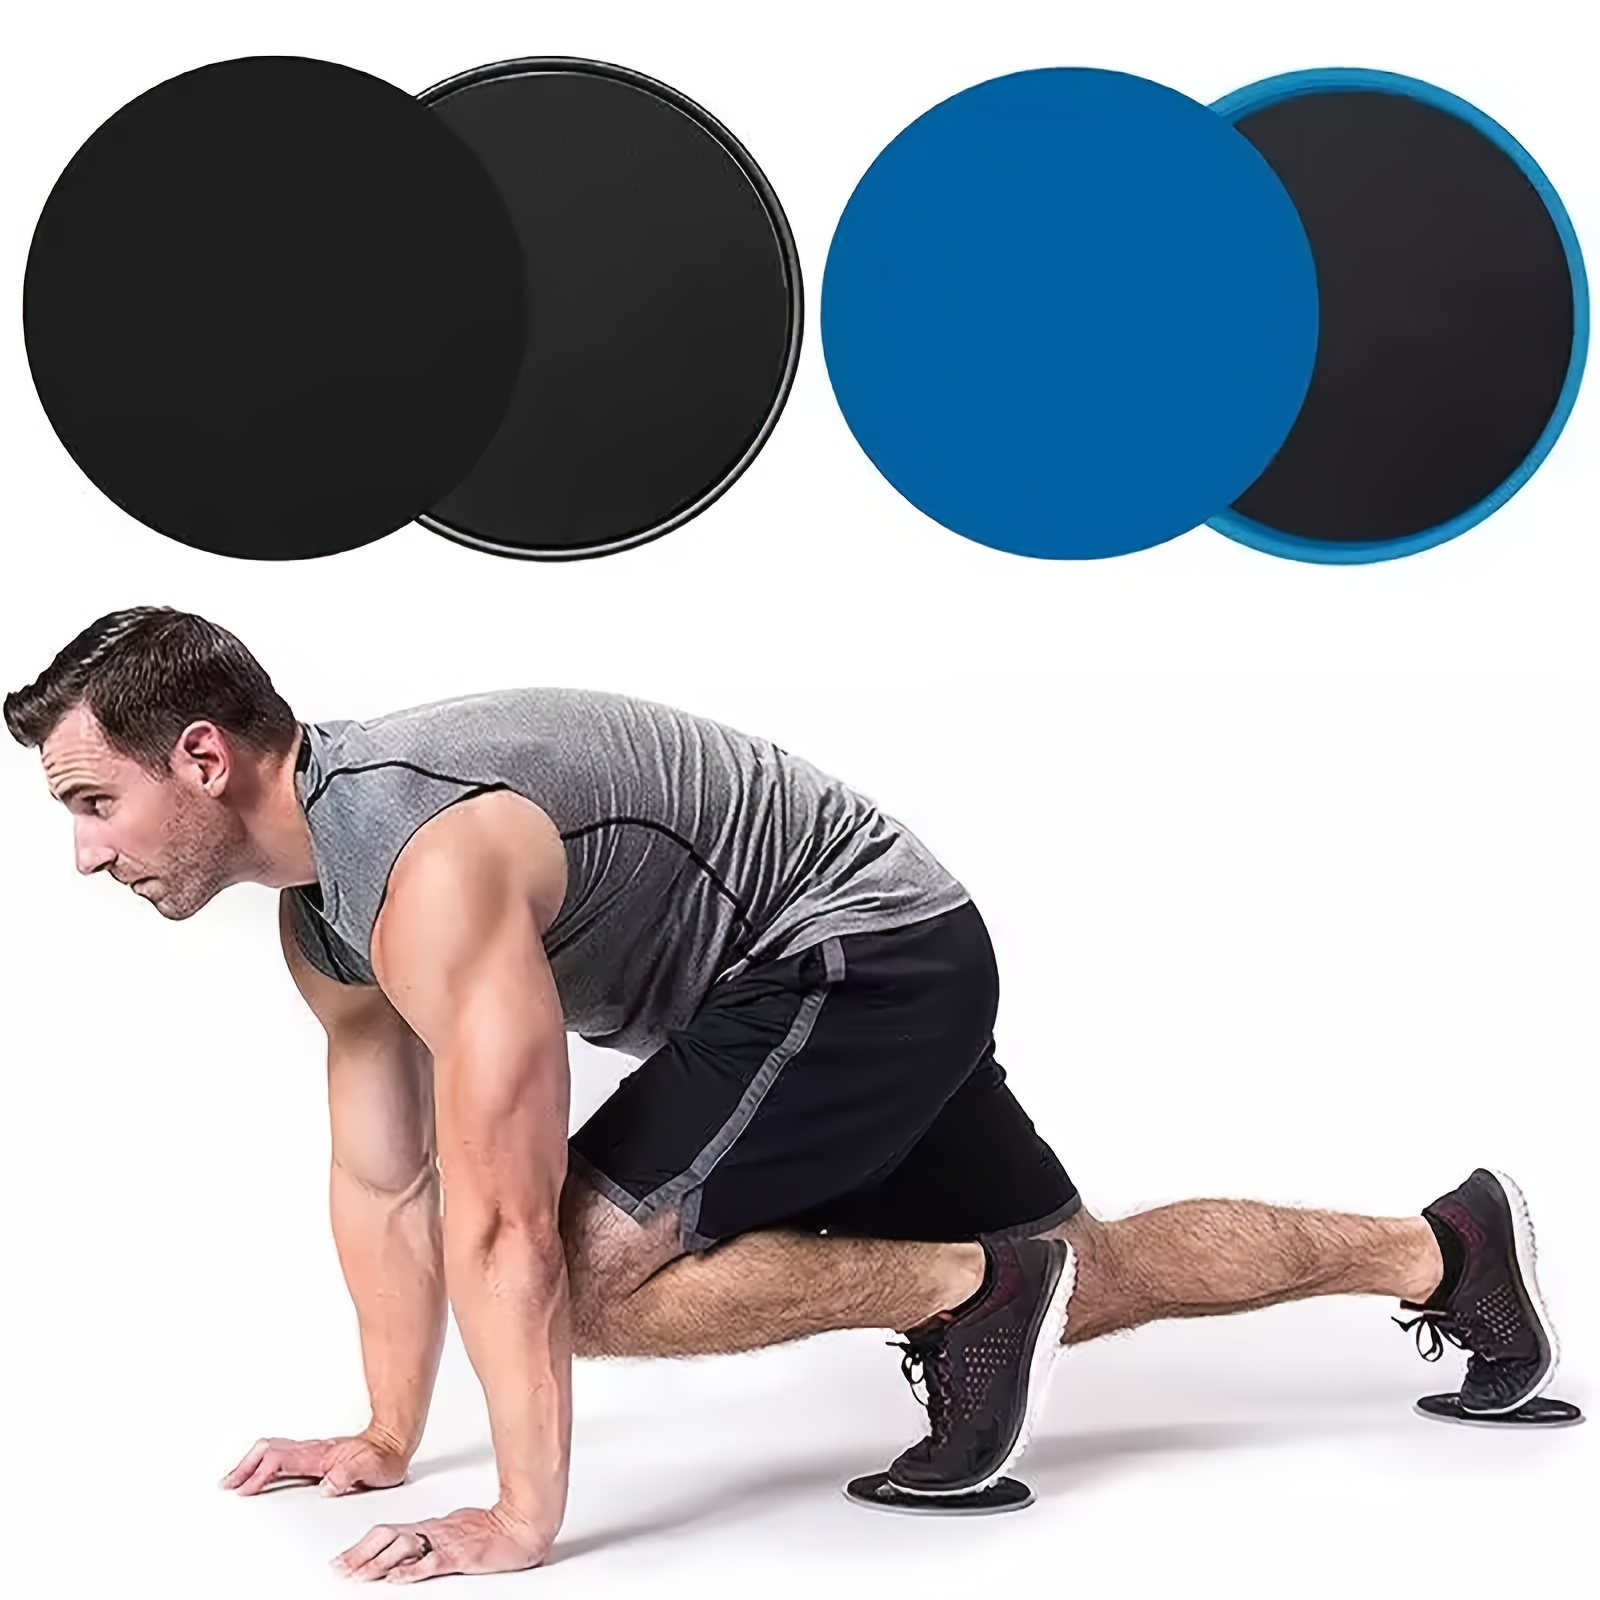 Abdominal Exercise Sliders - Core Gliding Discs For Full Body Workout And  Fitness Training, Check Out Today's Deals Now